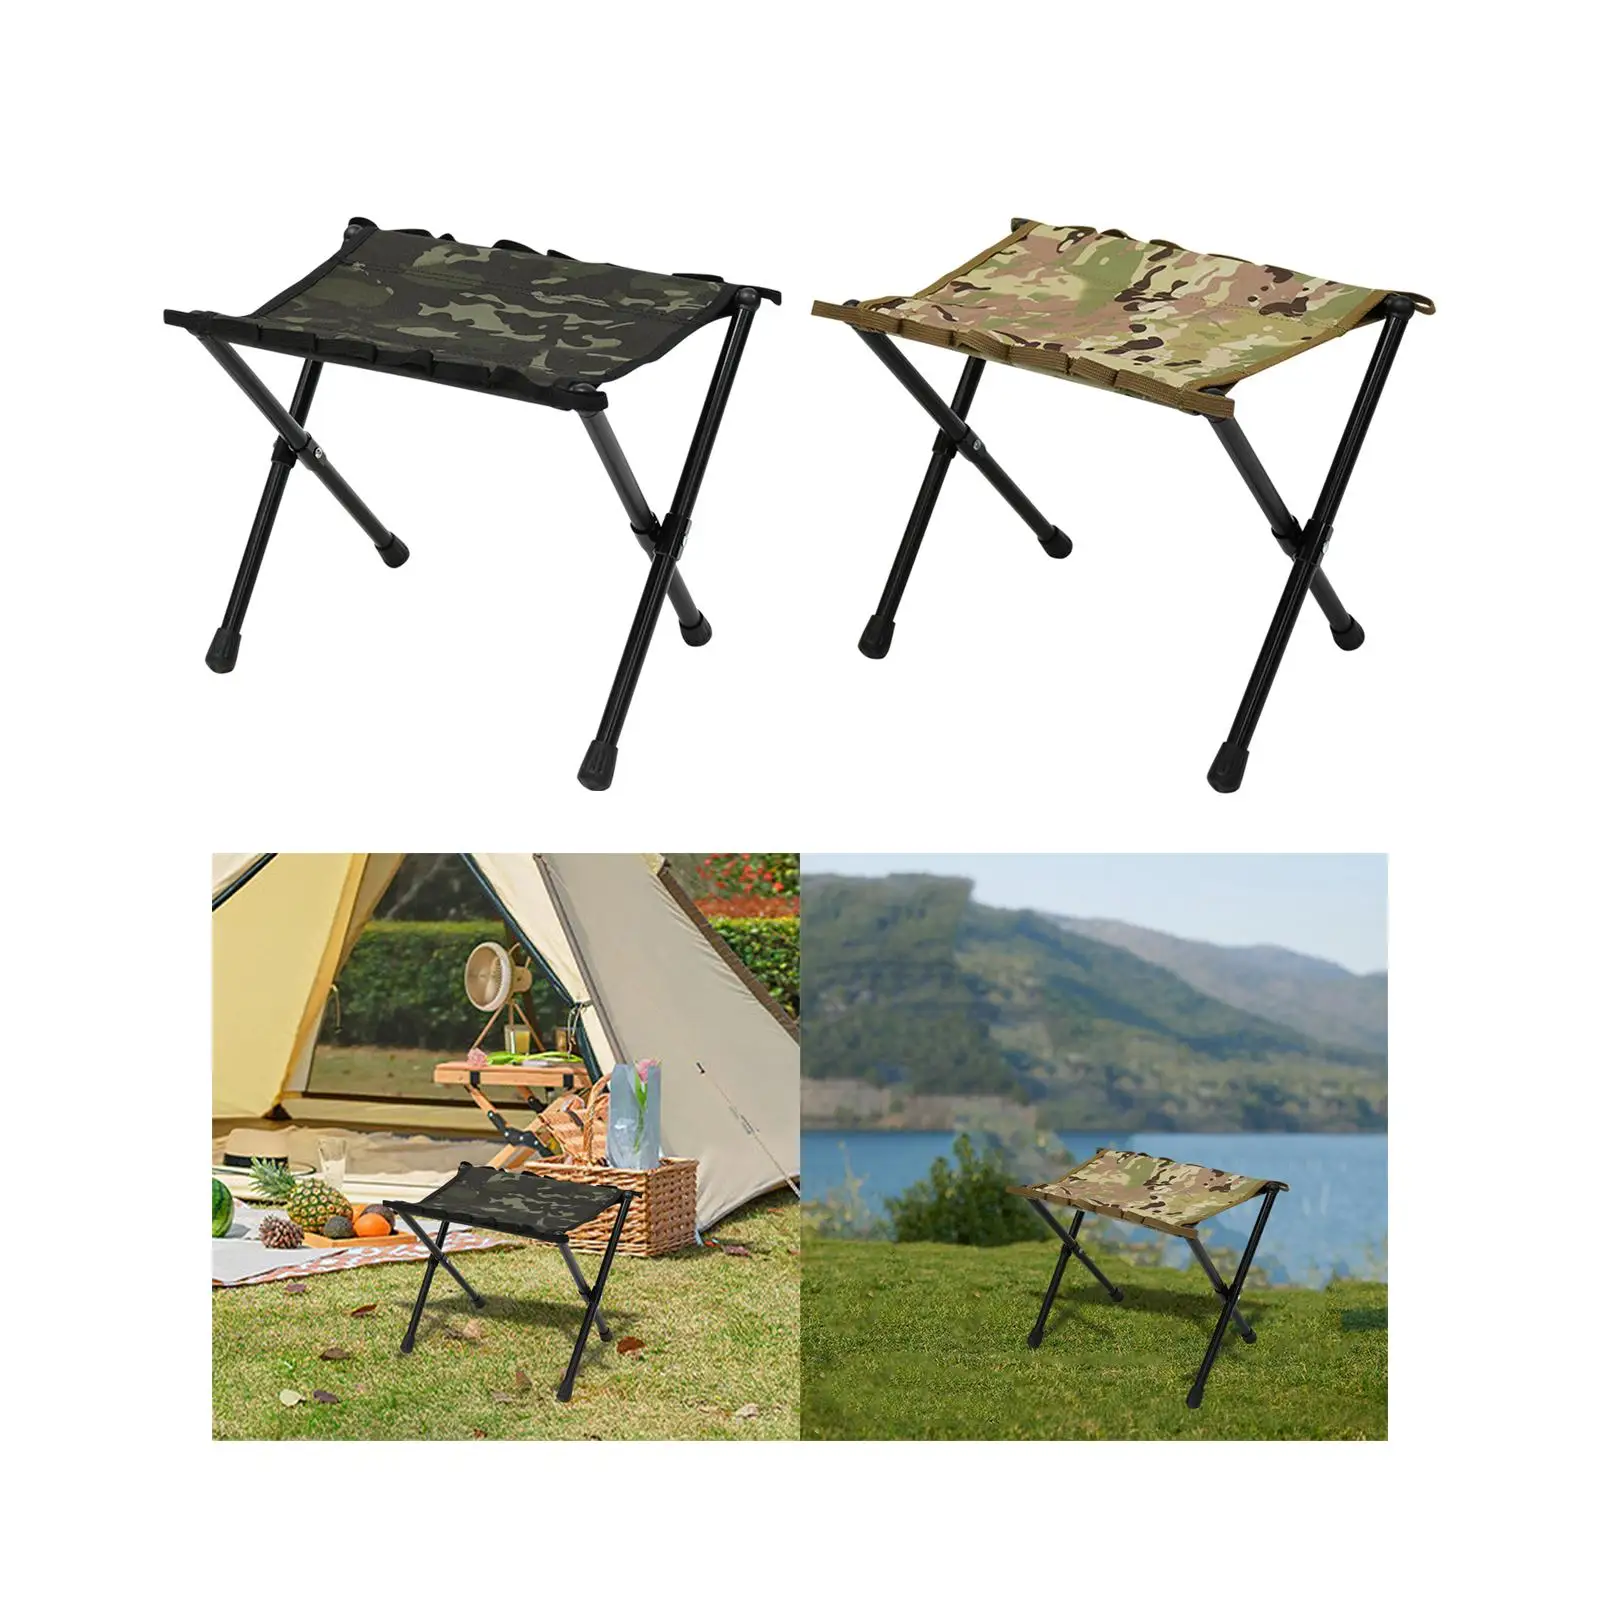 Camping Stools Folding Adults Outdoor Foldable Footstool Portable Fishing Chairs for Picnic Travel Fishing Barbecue